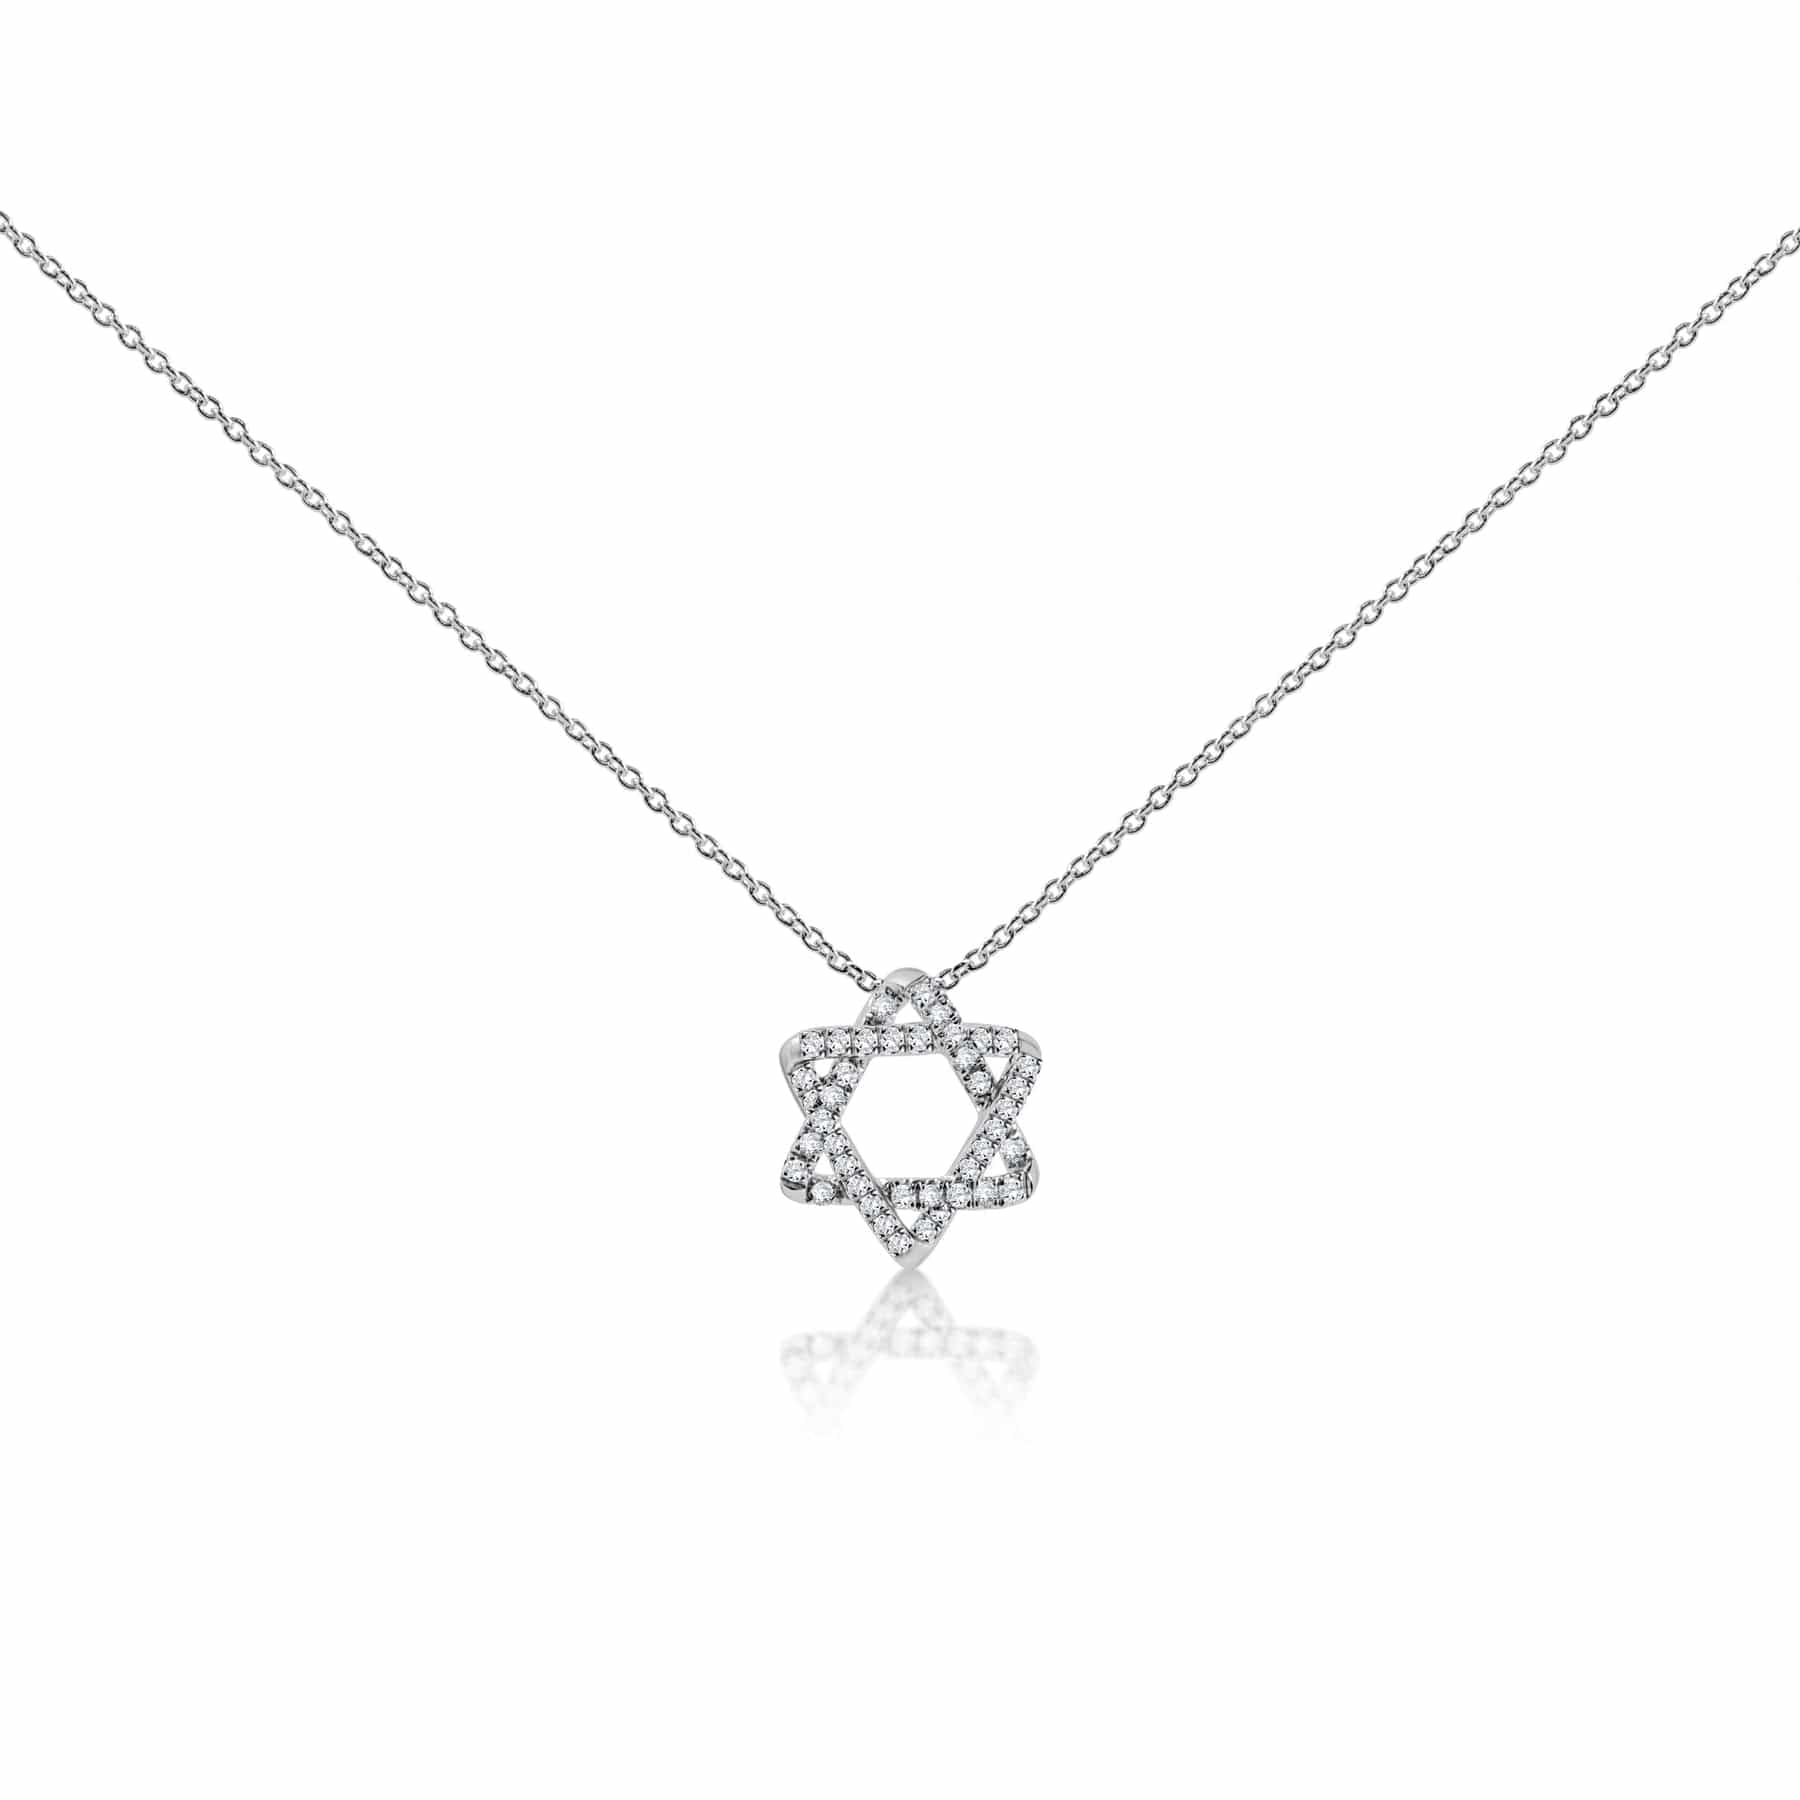 Alef Bet Necklaces 14k Gold and Diamond  Star of David Necklace - Gold, White Gold or Rose Gold